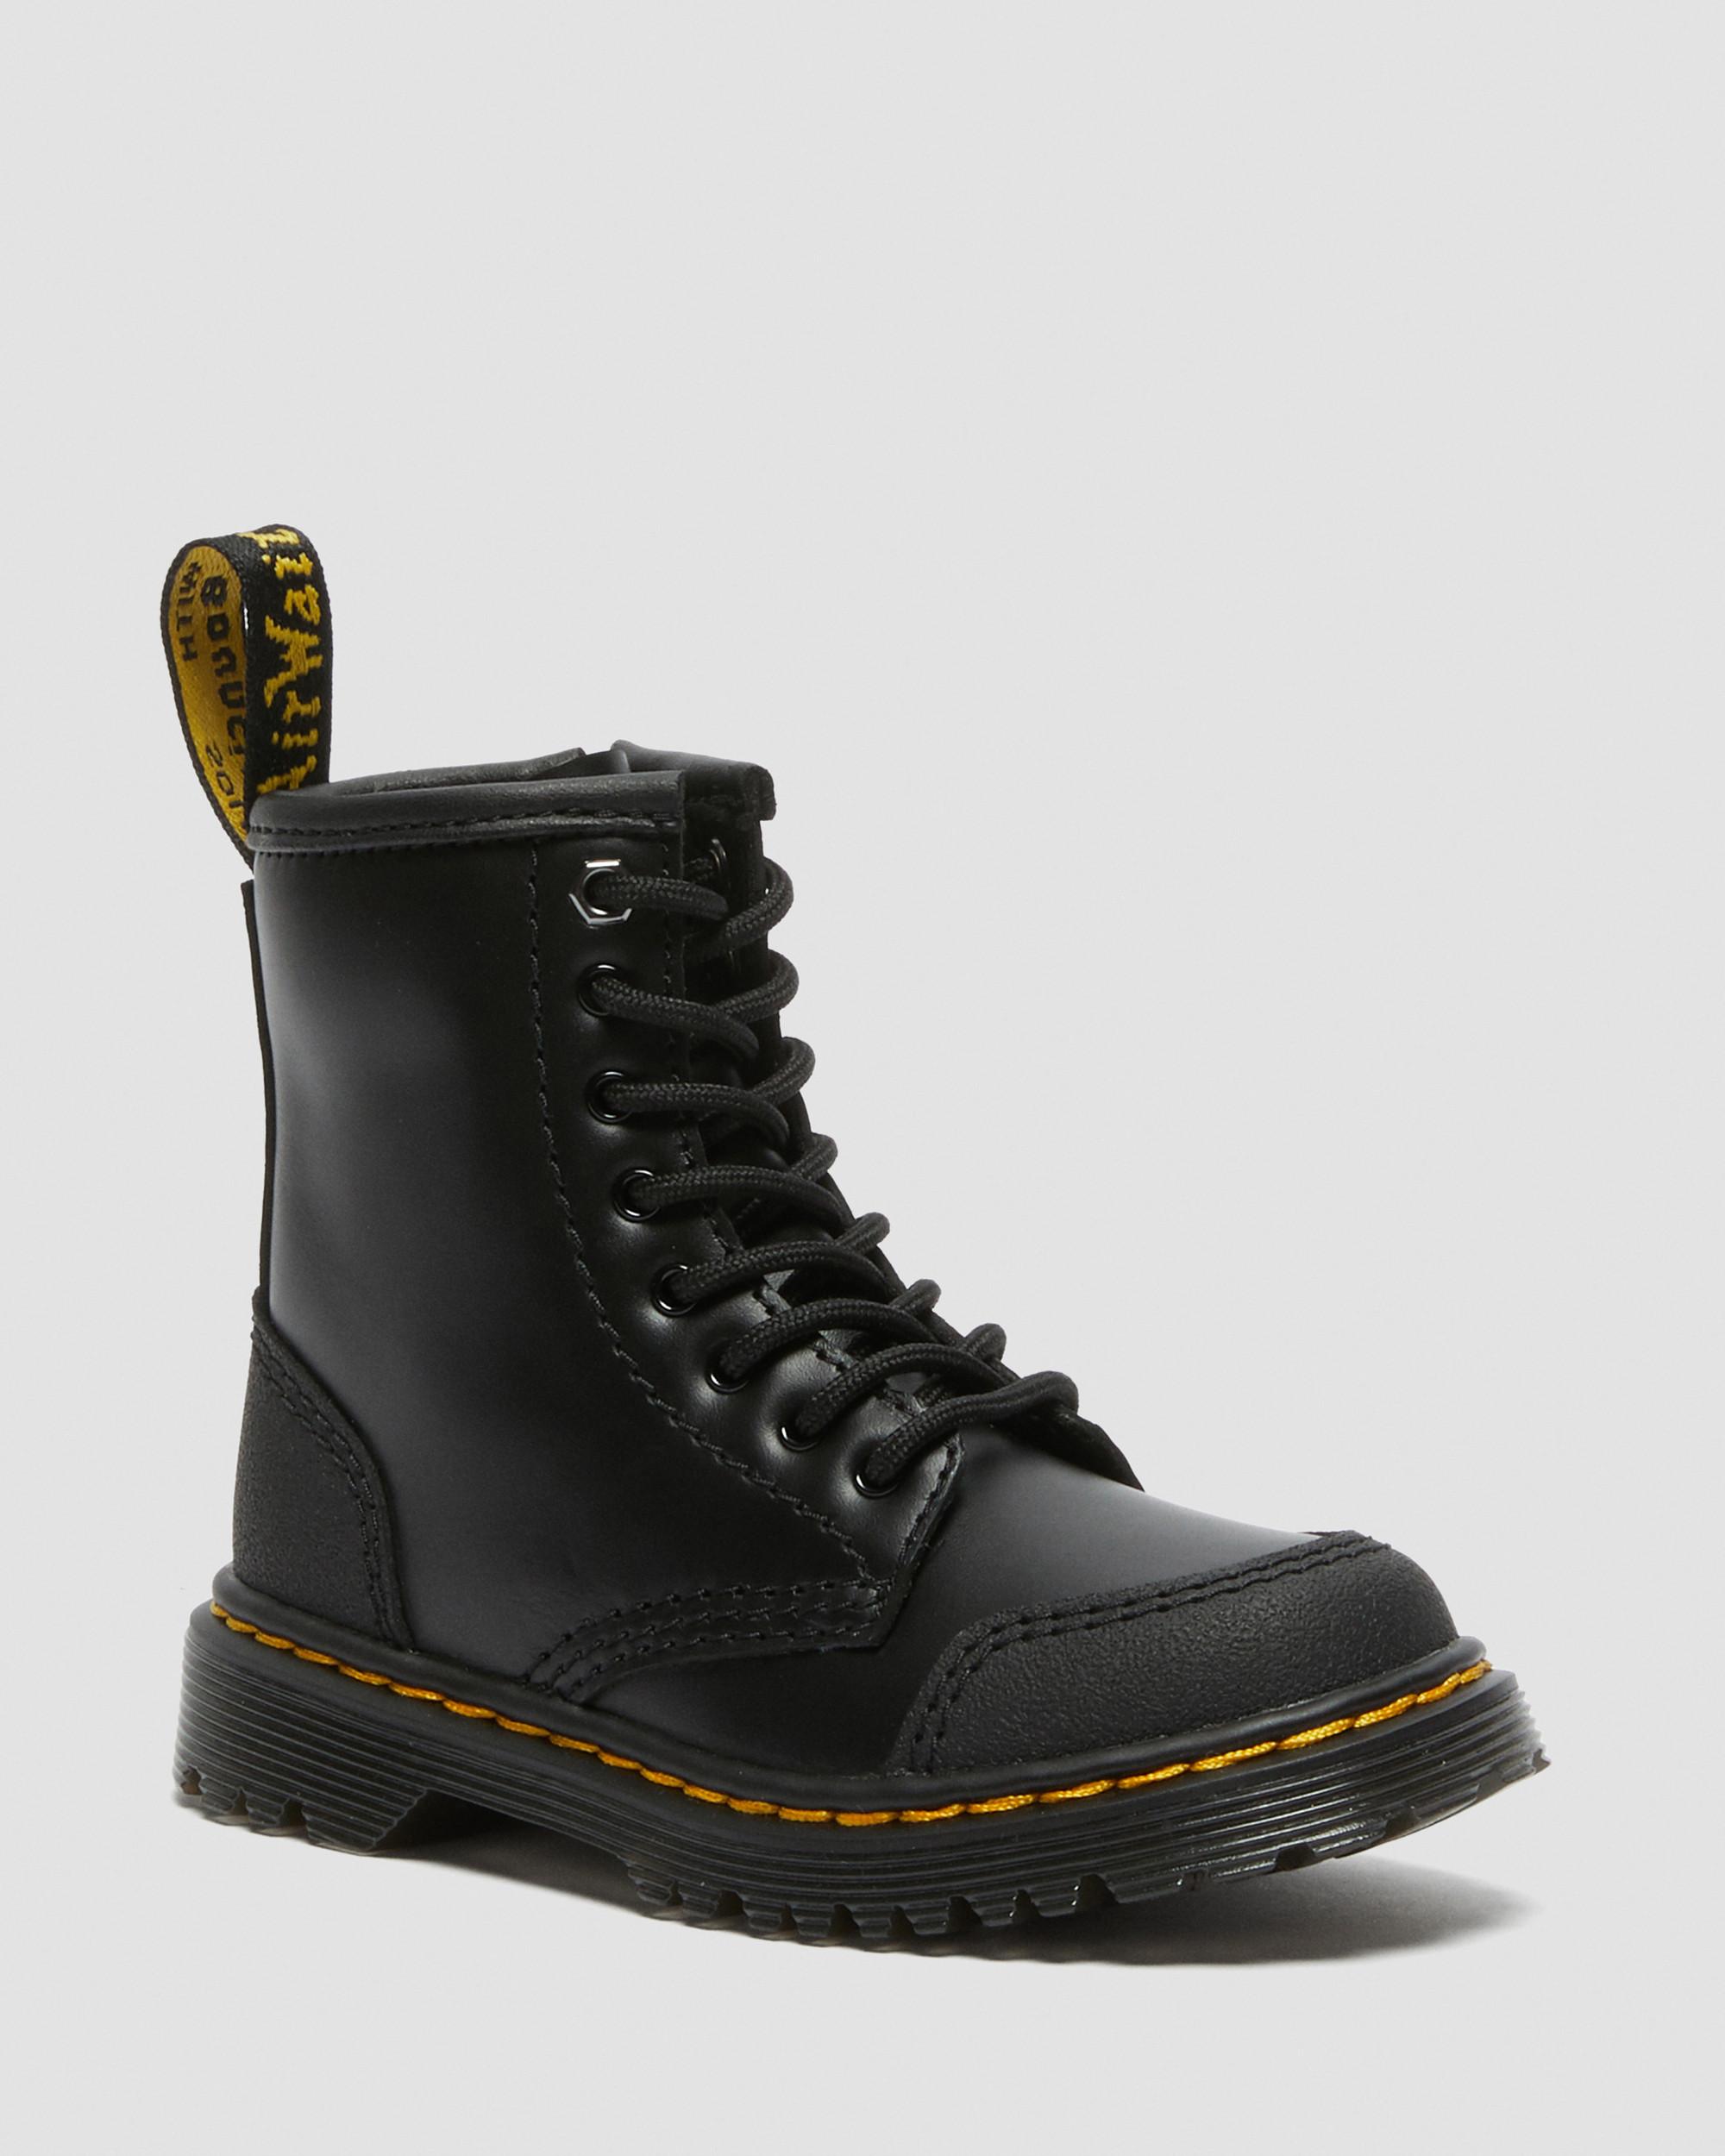 Toddler 1460 Overlay Leather Boots in Black | Dr. Martens